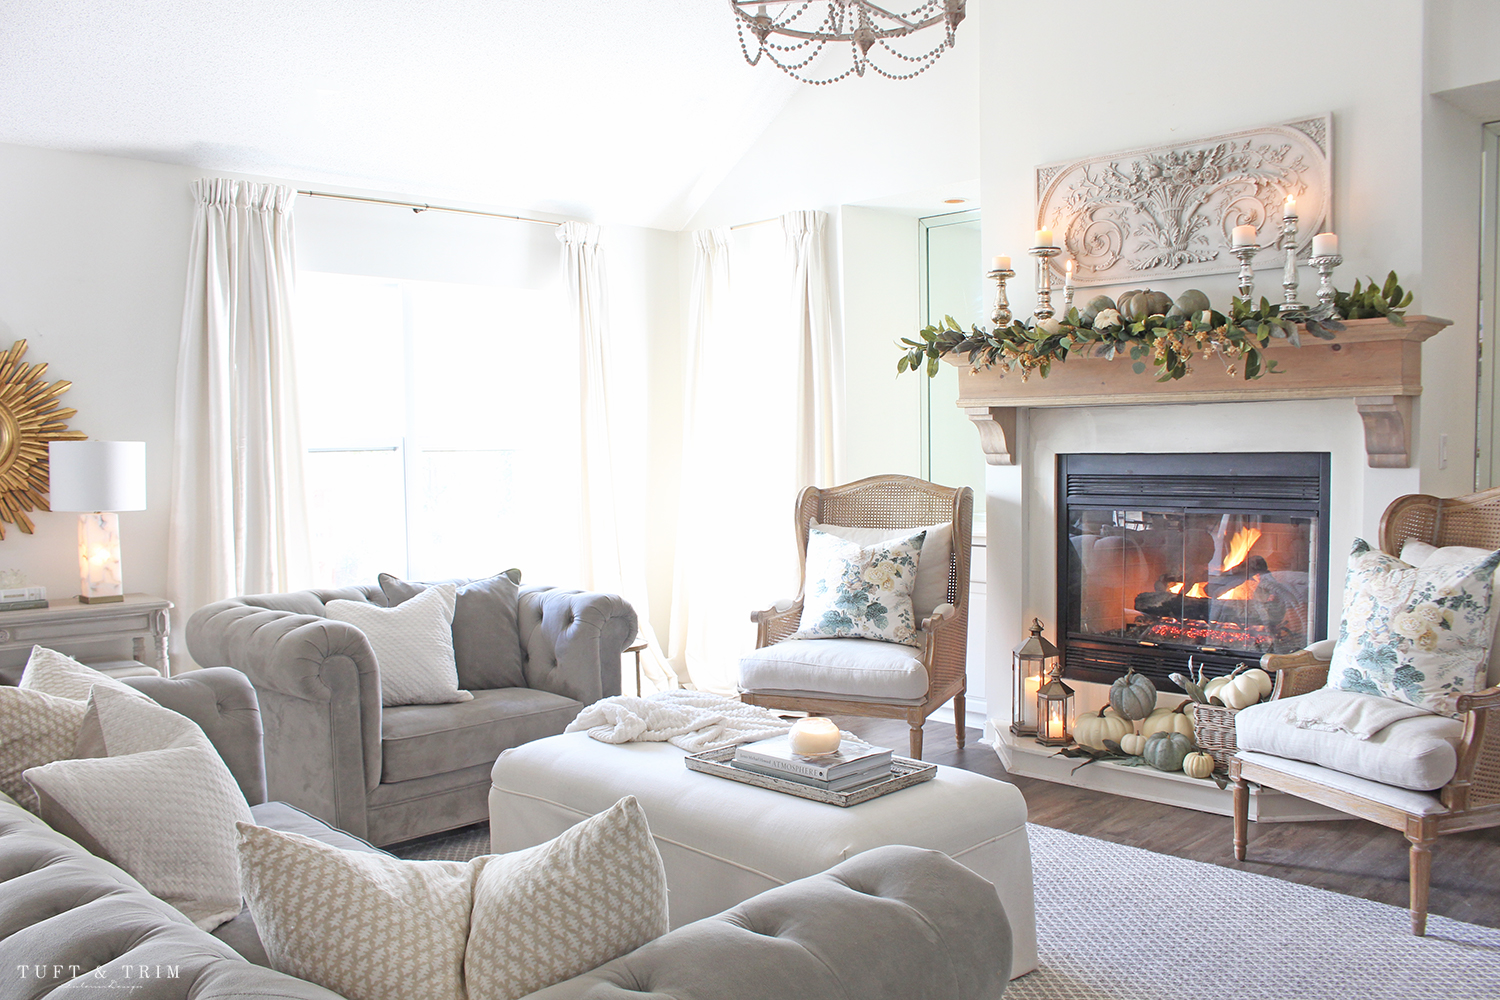 Easy Decorating Tips for an Elegant Fall Mantel with Tuft & Trim Interior Design